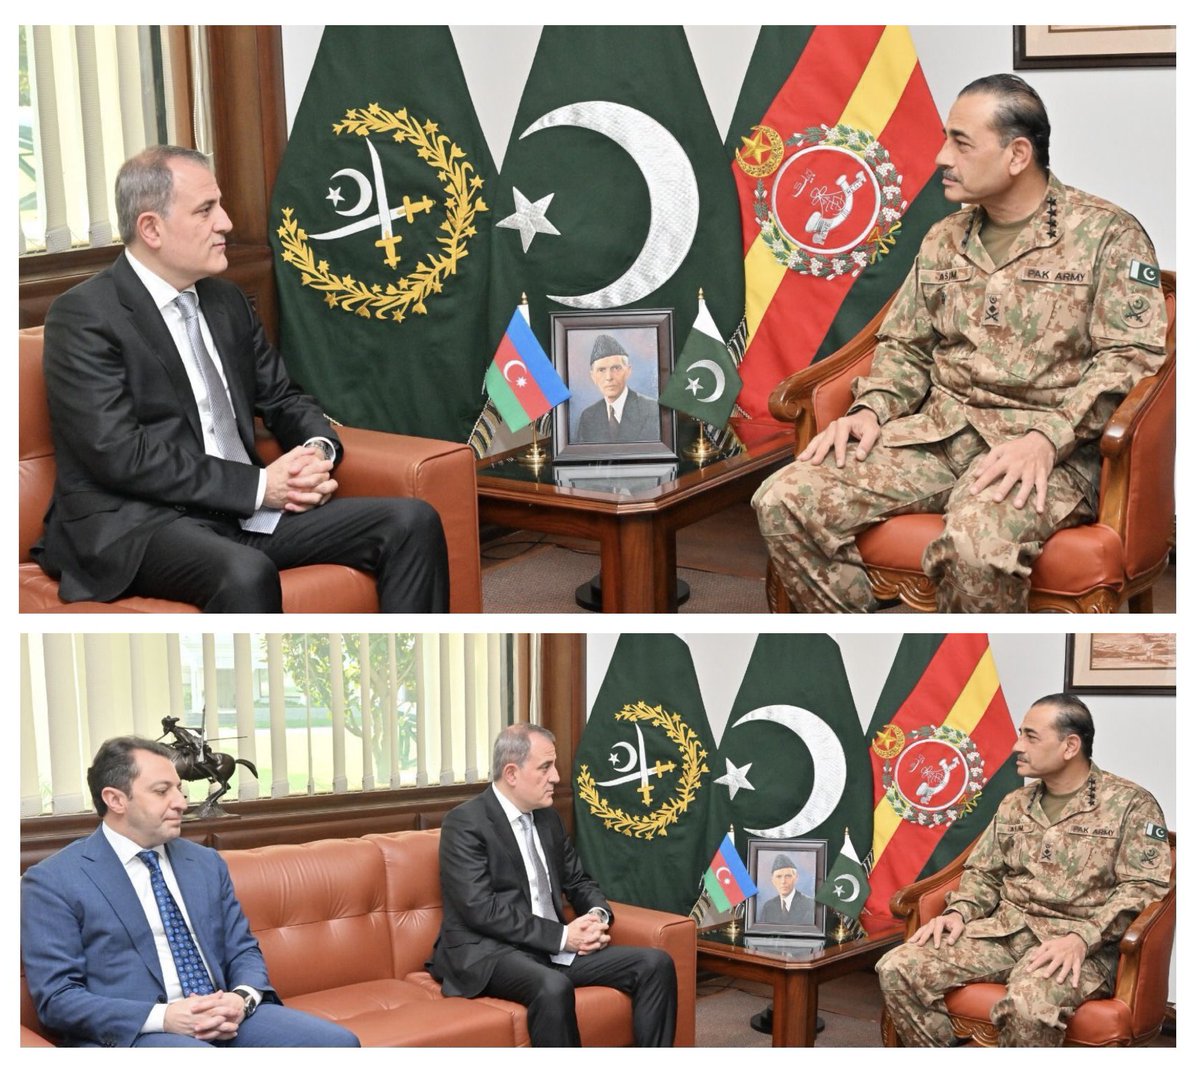 #ISPR
The Foreign Minister of #Azerbaijan, Jeyhun Bayramov, called on General Syed Asim Munir, NI (M), Chief of Army Staff (COAS), at the General Headquarters (GHQ) Rawalpindi

#PakistanArmy #Pakistan #COAS

During their meeting, they engaged in in-depth discussions on matters of